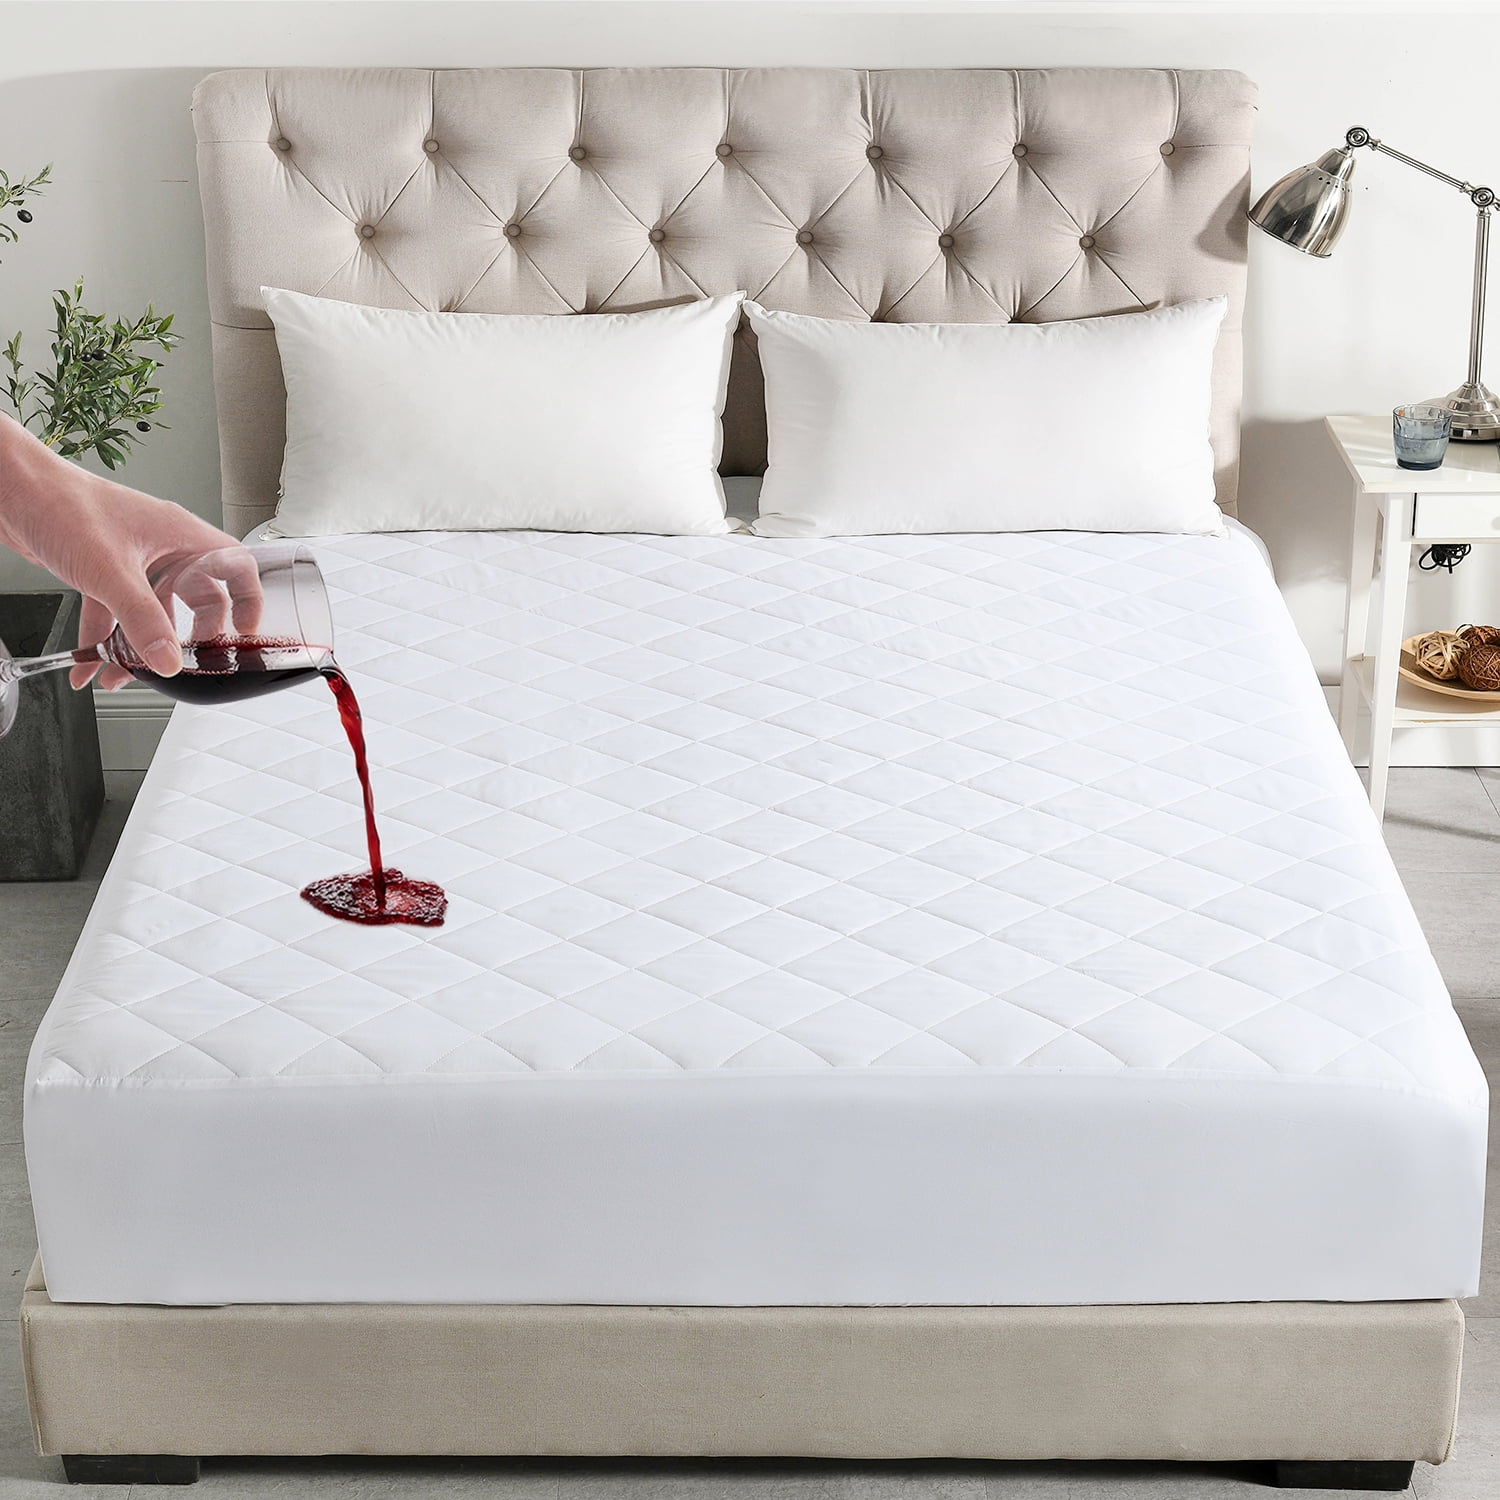 WATERPROOF EXTRA DEEP QUILTED MATTRESS PROTECTOR FITTED BED COVER !!!ALL SIZES 